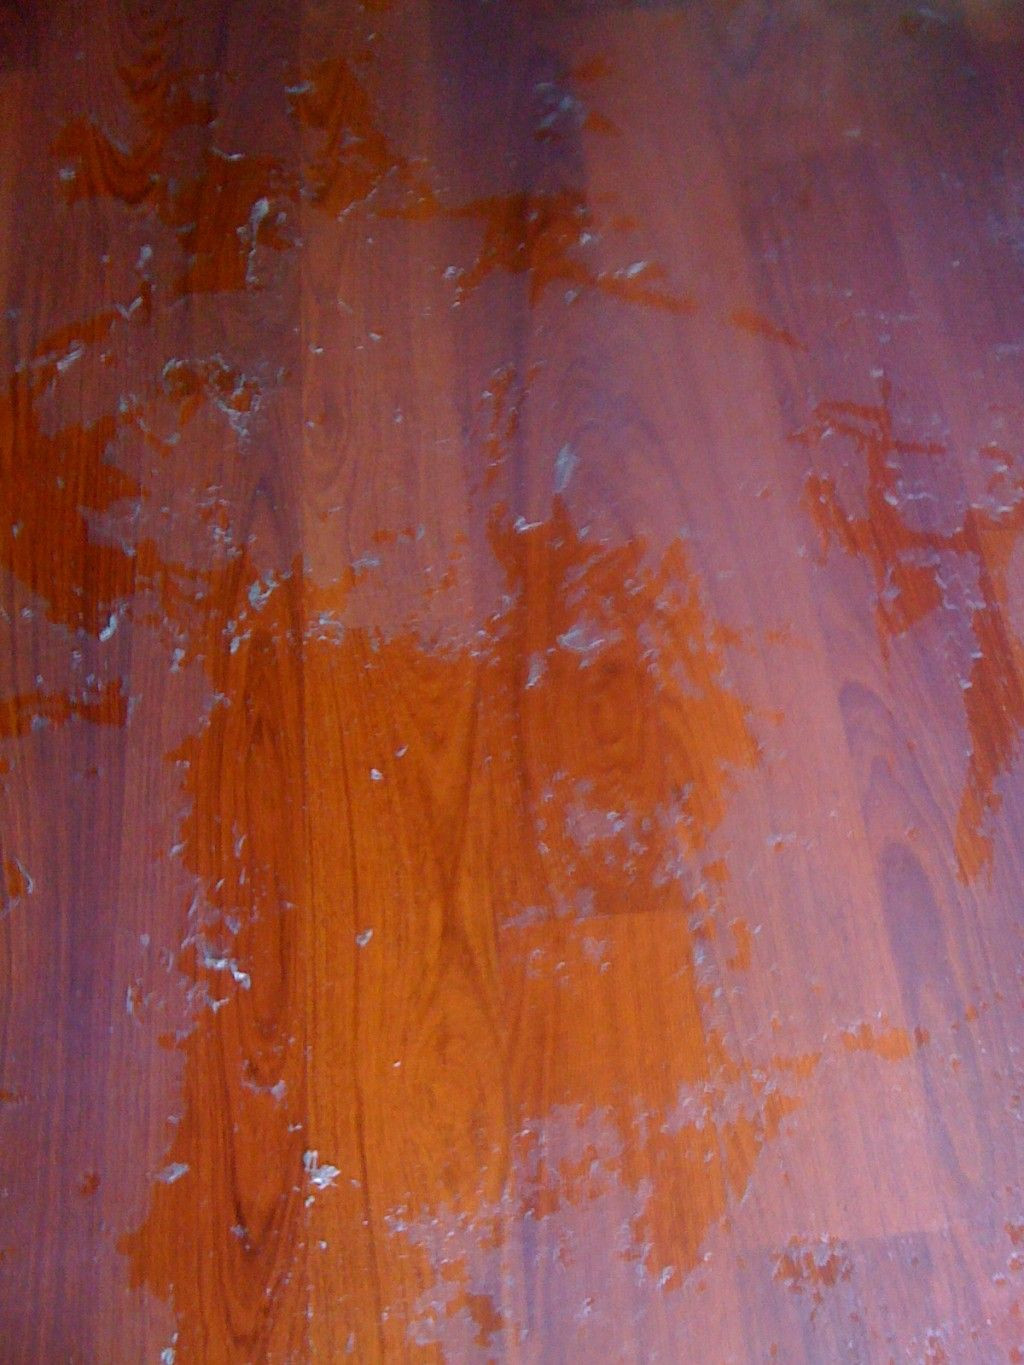 10 Lovely Hardwood Floor Cleaner Leaves Film 2024 free download hardwood floor cleaner leaves film of how to remove wax and oil soap cleaners from wood floors recipes throughout how to remove oily or wax build up from cleaning or polishing solutions from